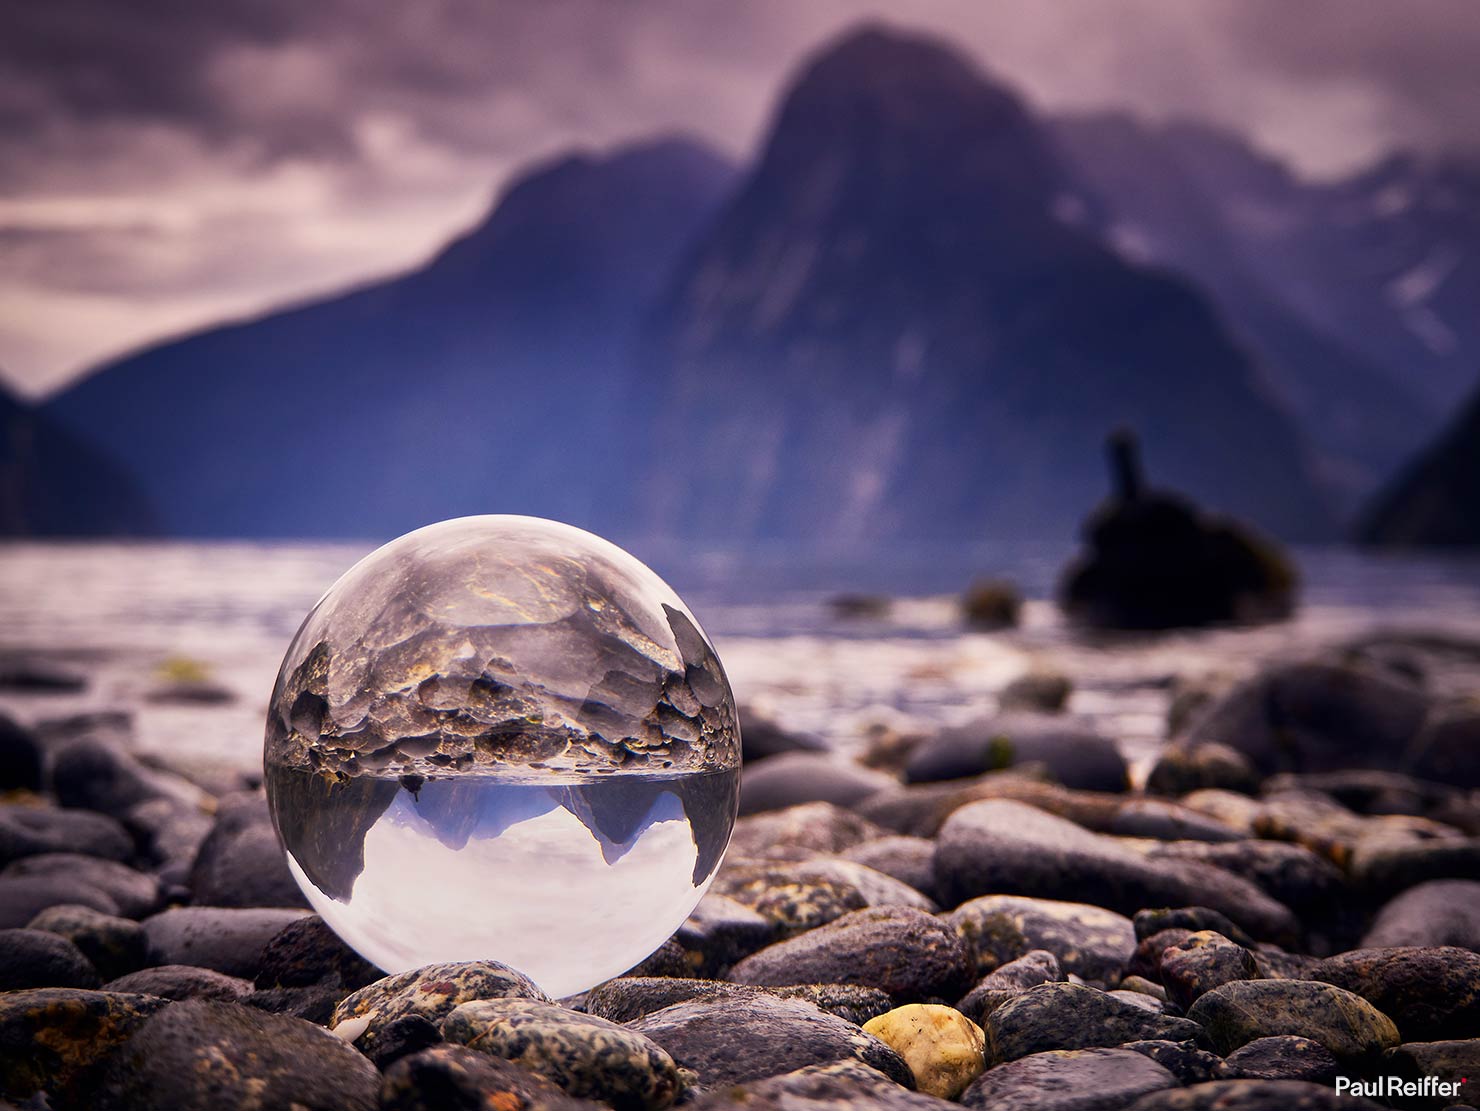 Milford Sound Stones Lake Fjord New Zealand Lensball Glass Ball Photography How To Learn Paul Reiffer Photographer Stormy Landscape